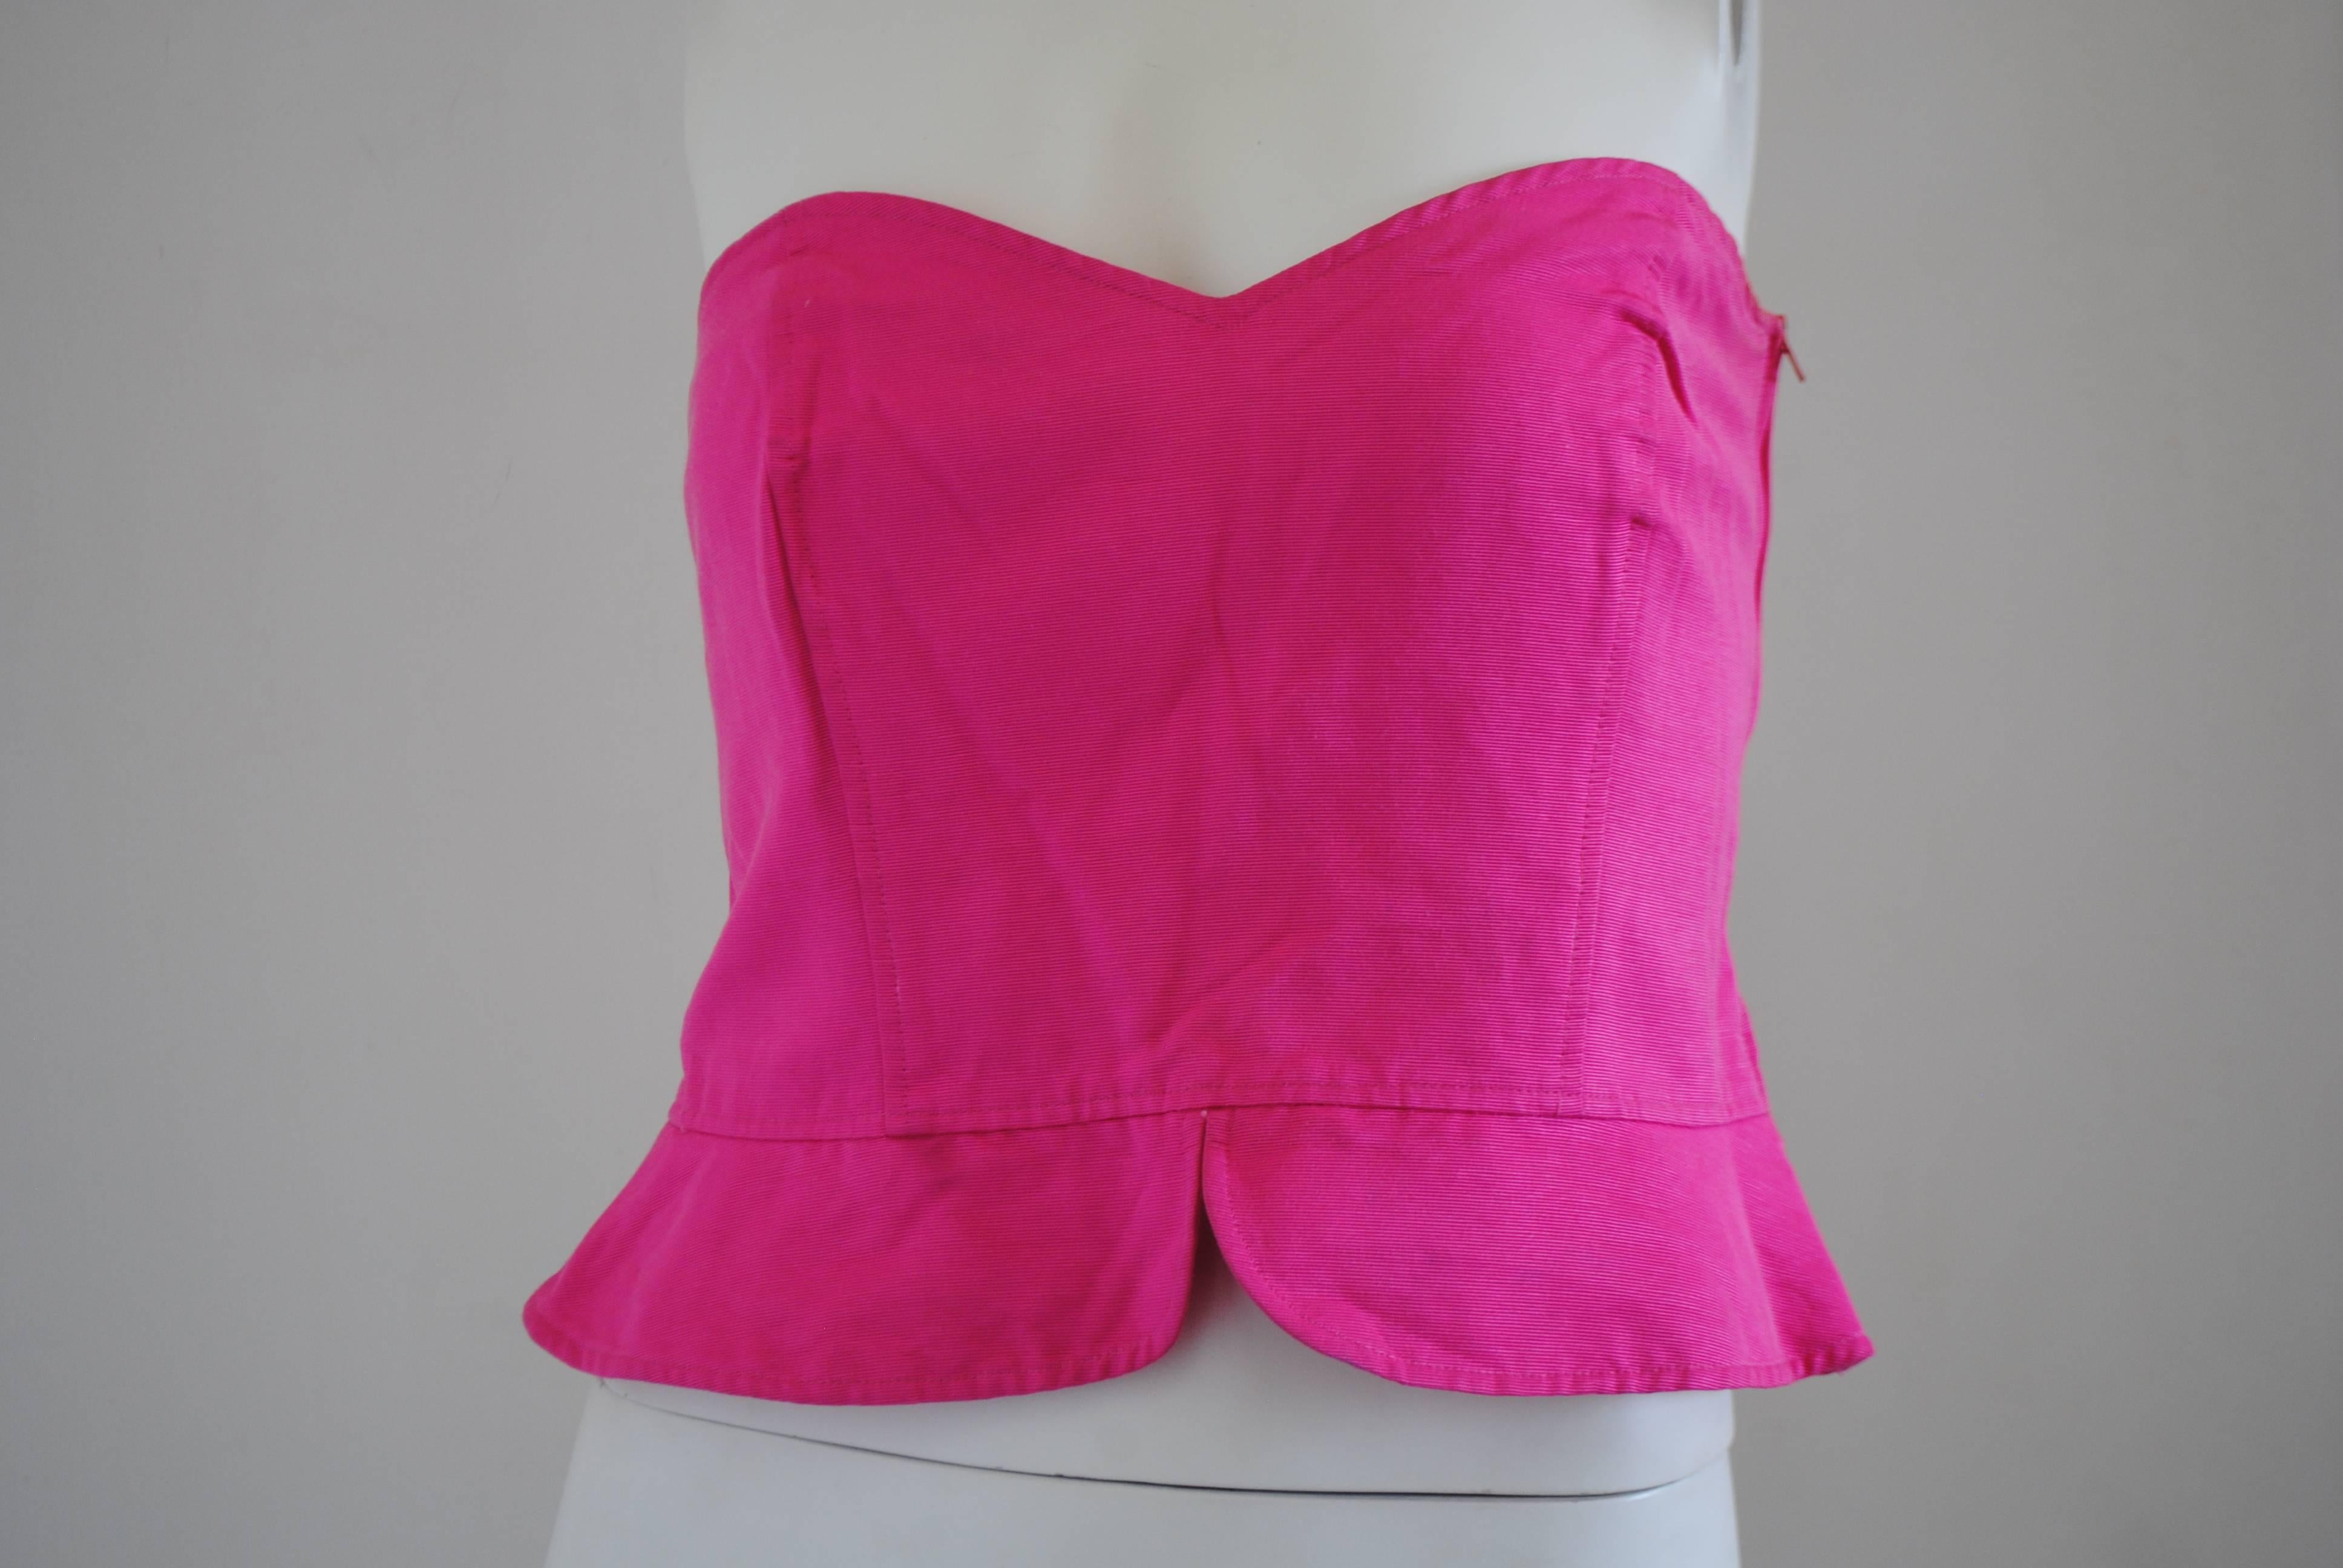 1980s Ungaro Corset

Totally made in italy in size 46

Composition: Viscose and cotton